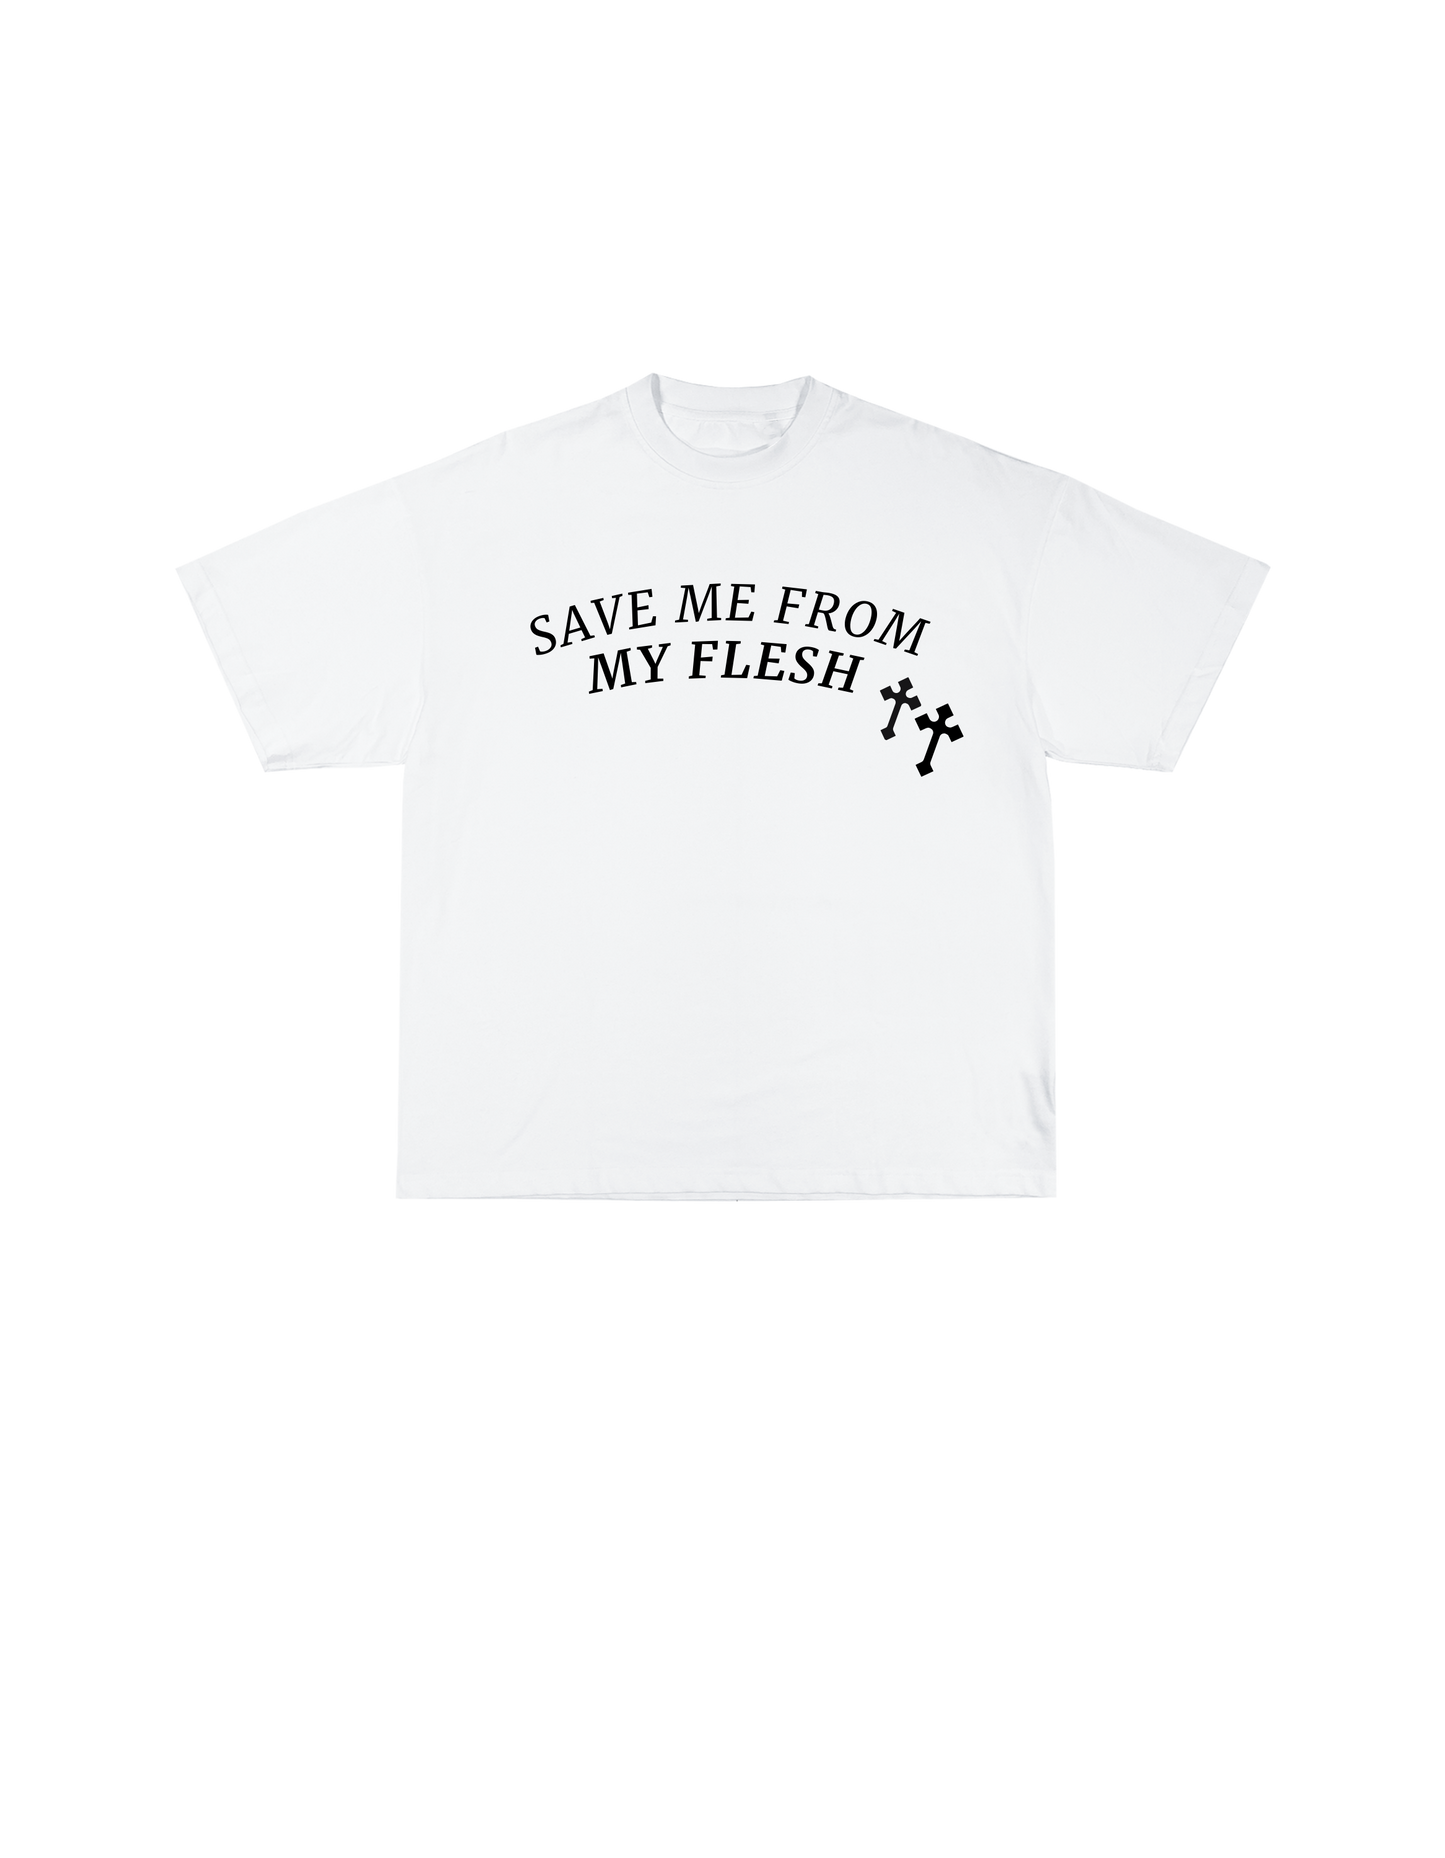 "SAVE ME FROM MY FLESH" Tee